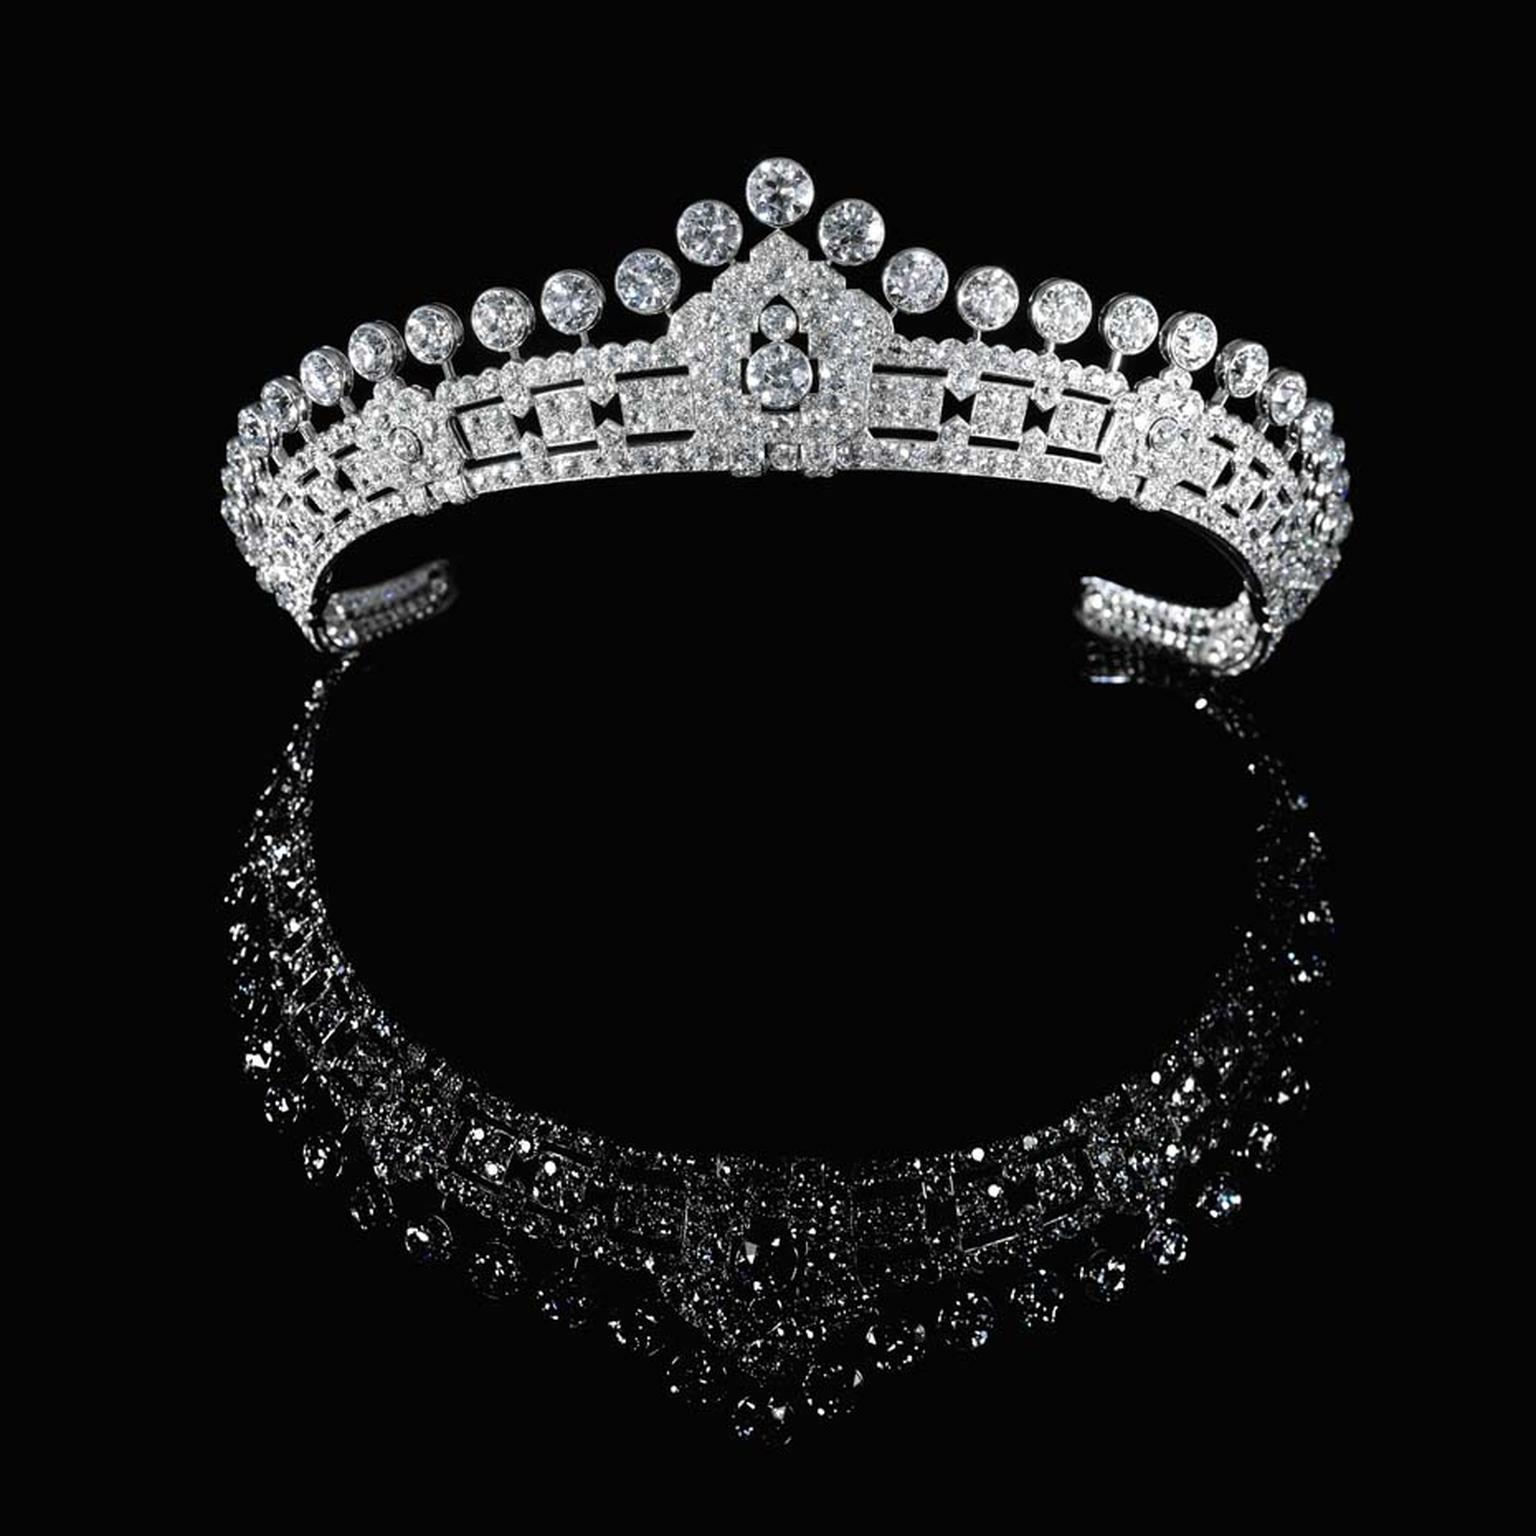 The stunning Cartier tiara from the 1930s was part of the estate of Mary, Duchess of Roxburghe, and sold for $2.59 million at Sotheby’s Geneva on 12 May 2015.